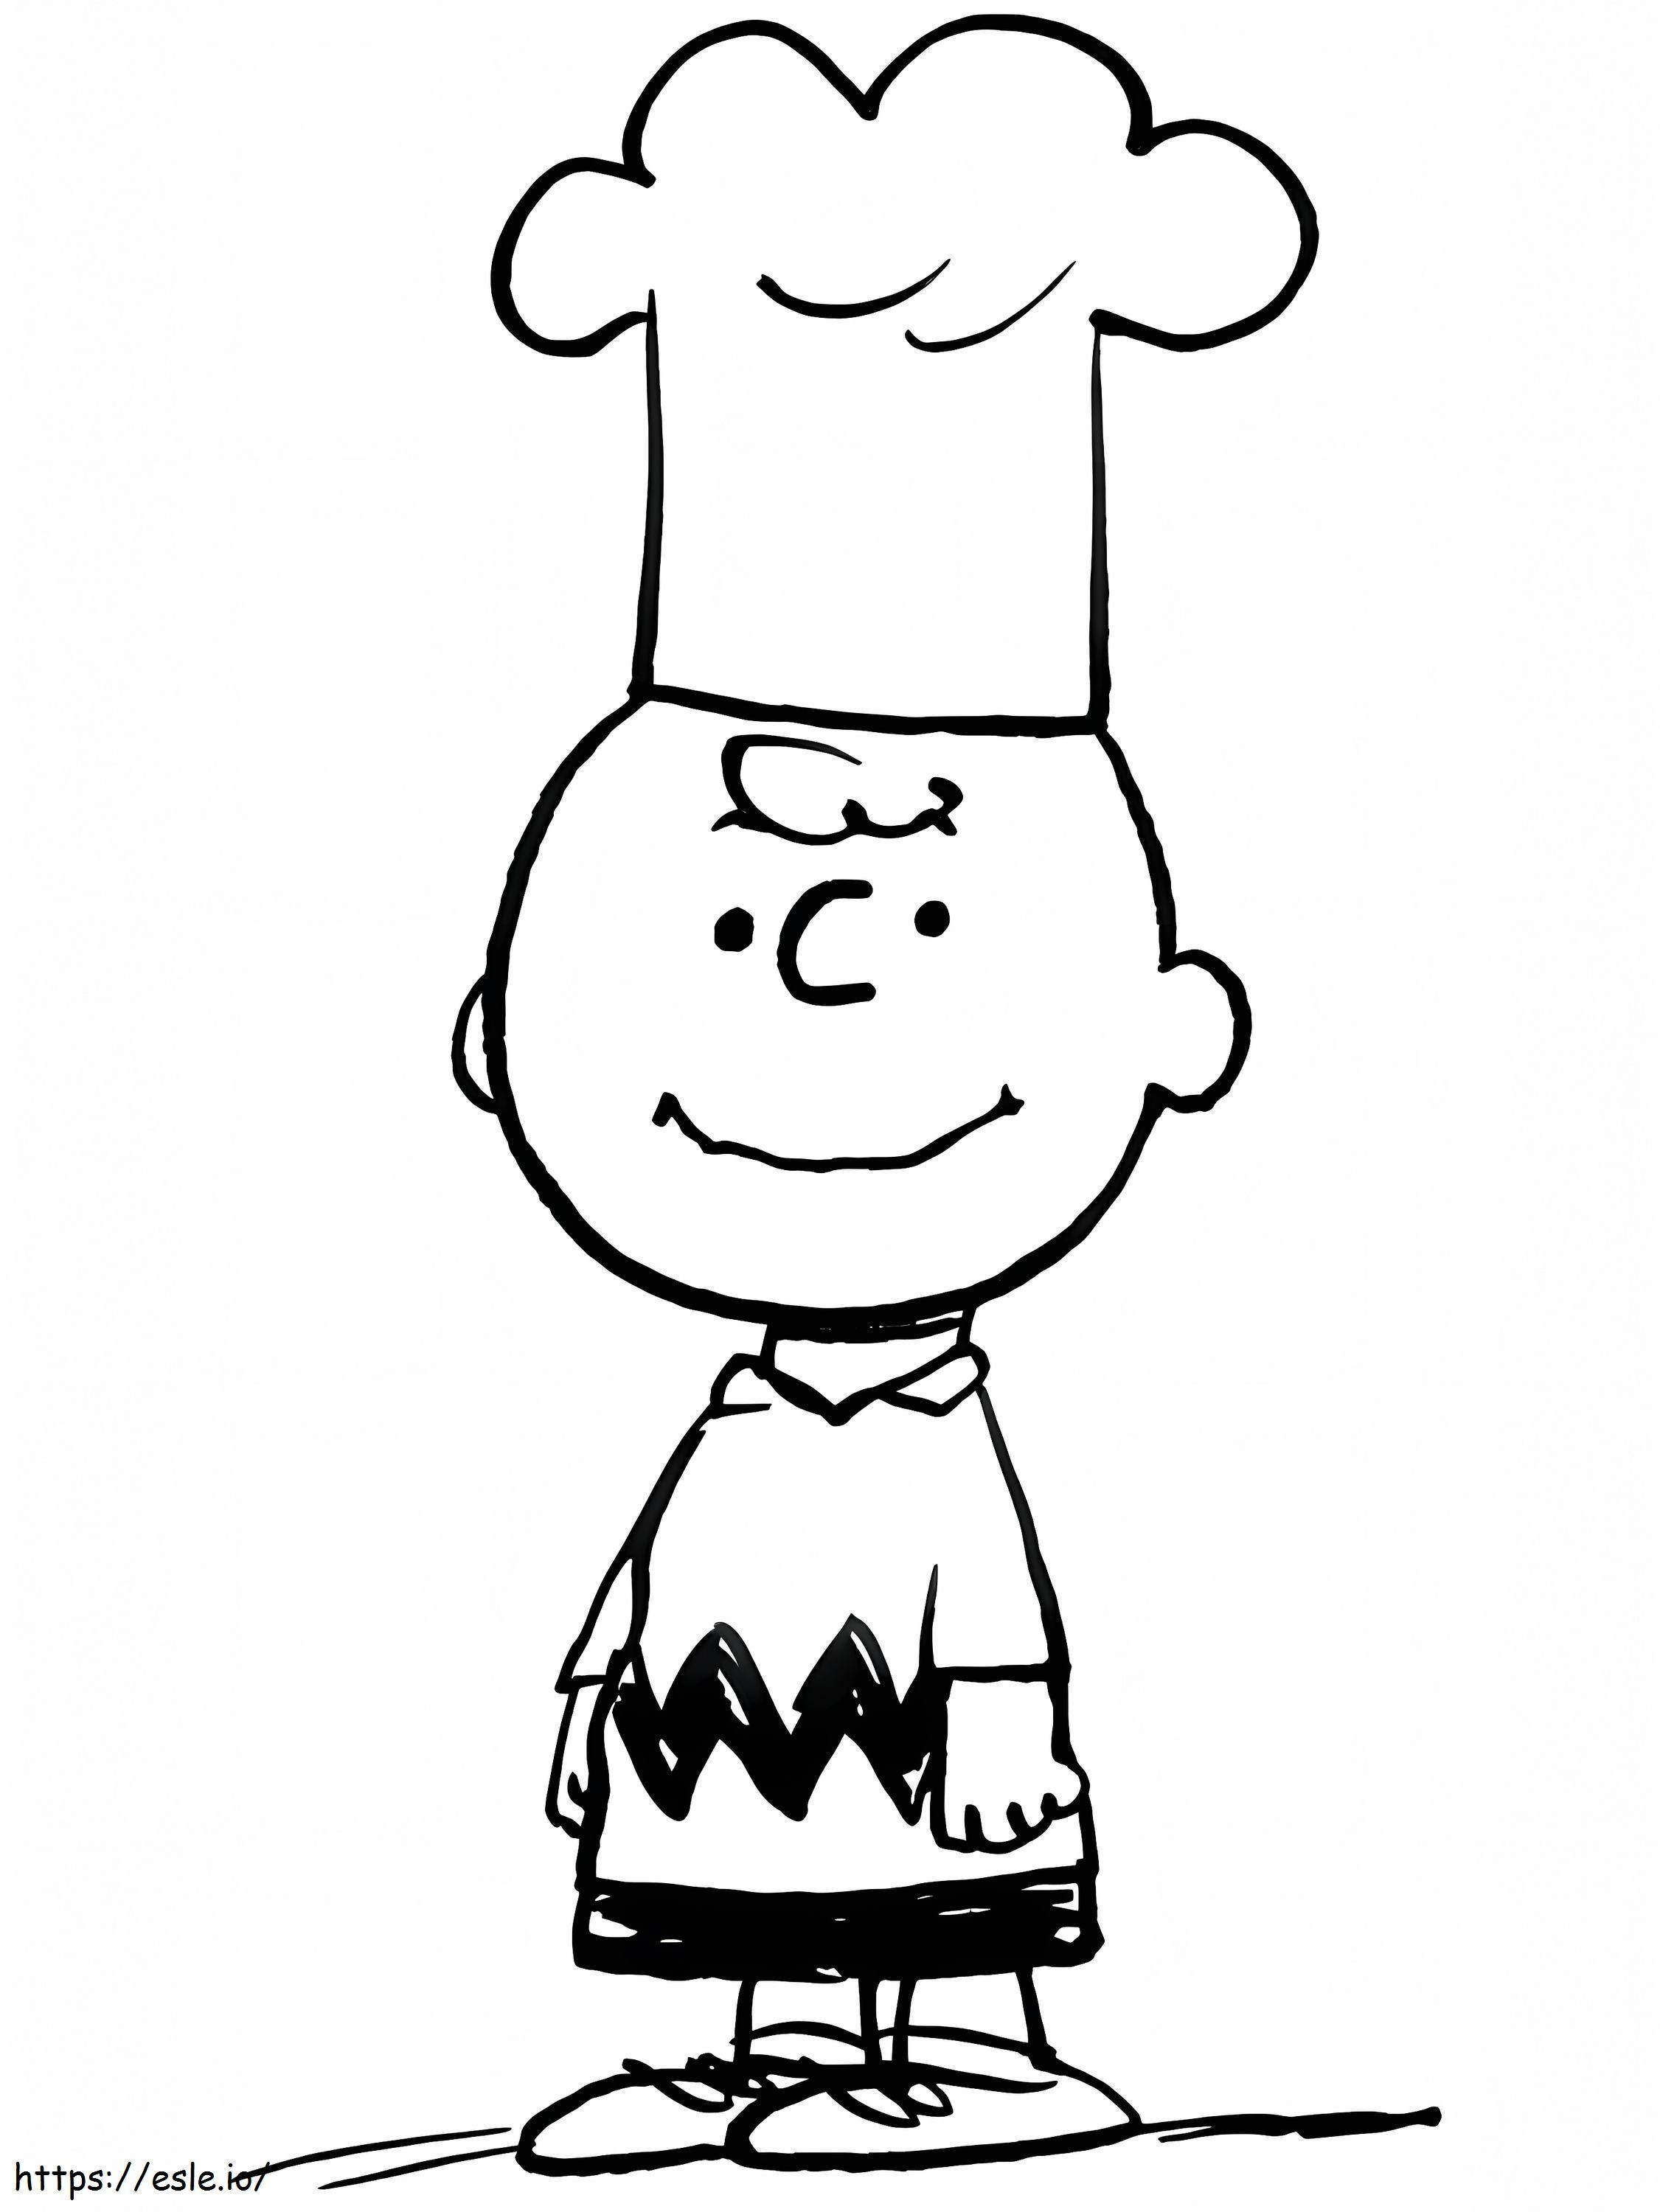 Chef Charlie Brown coloring page